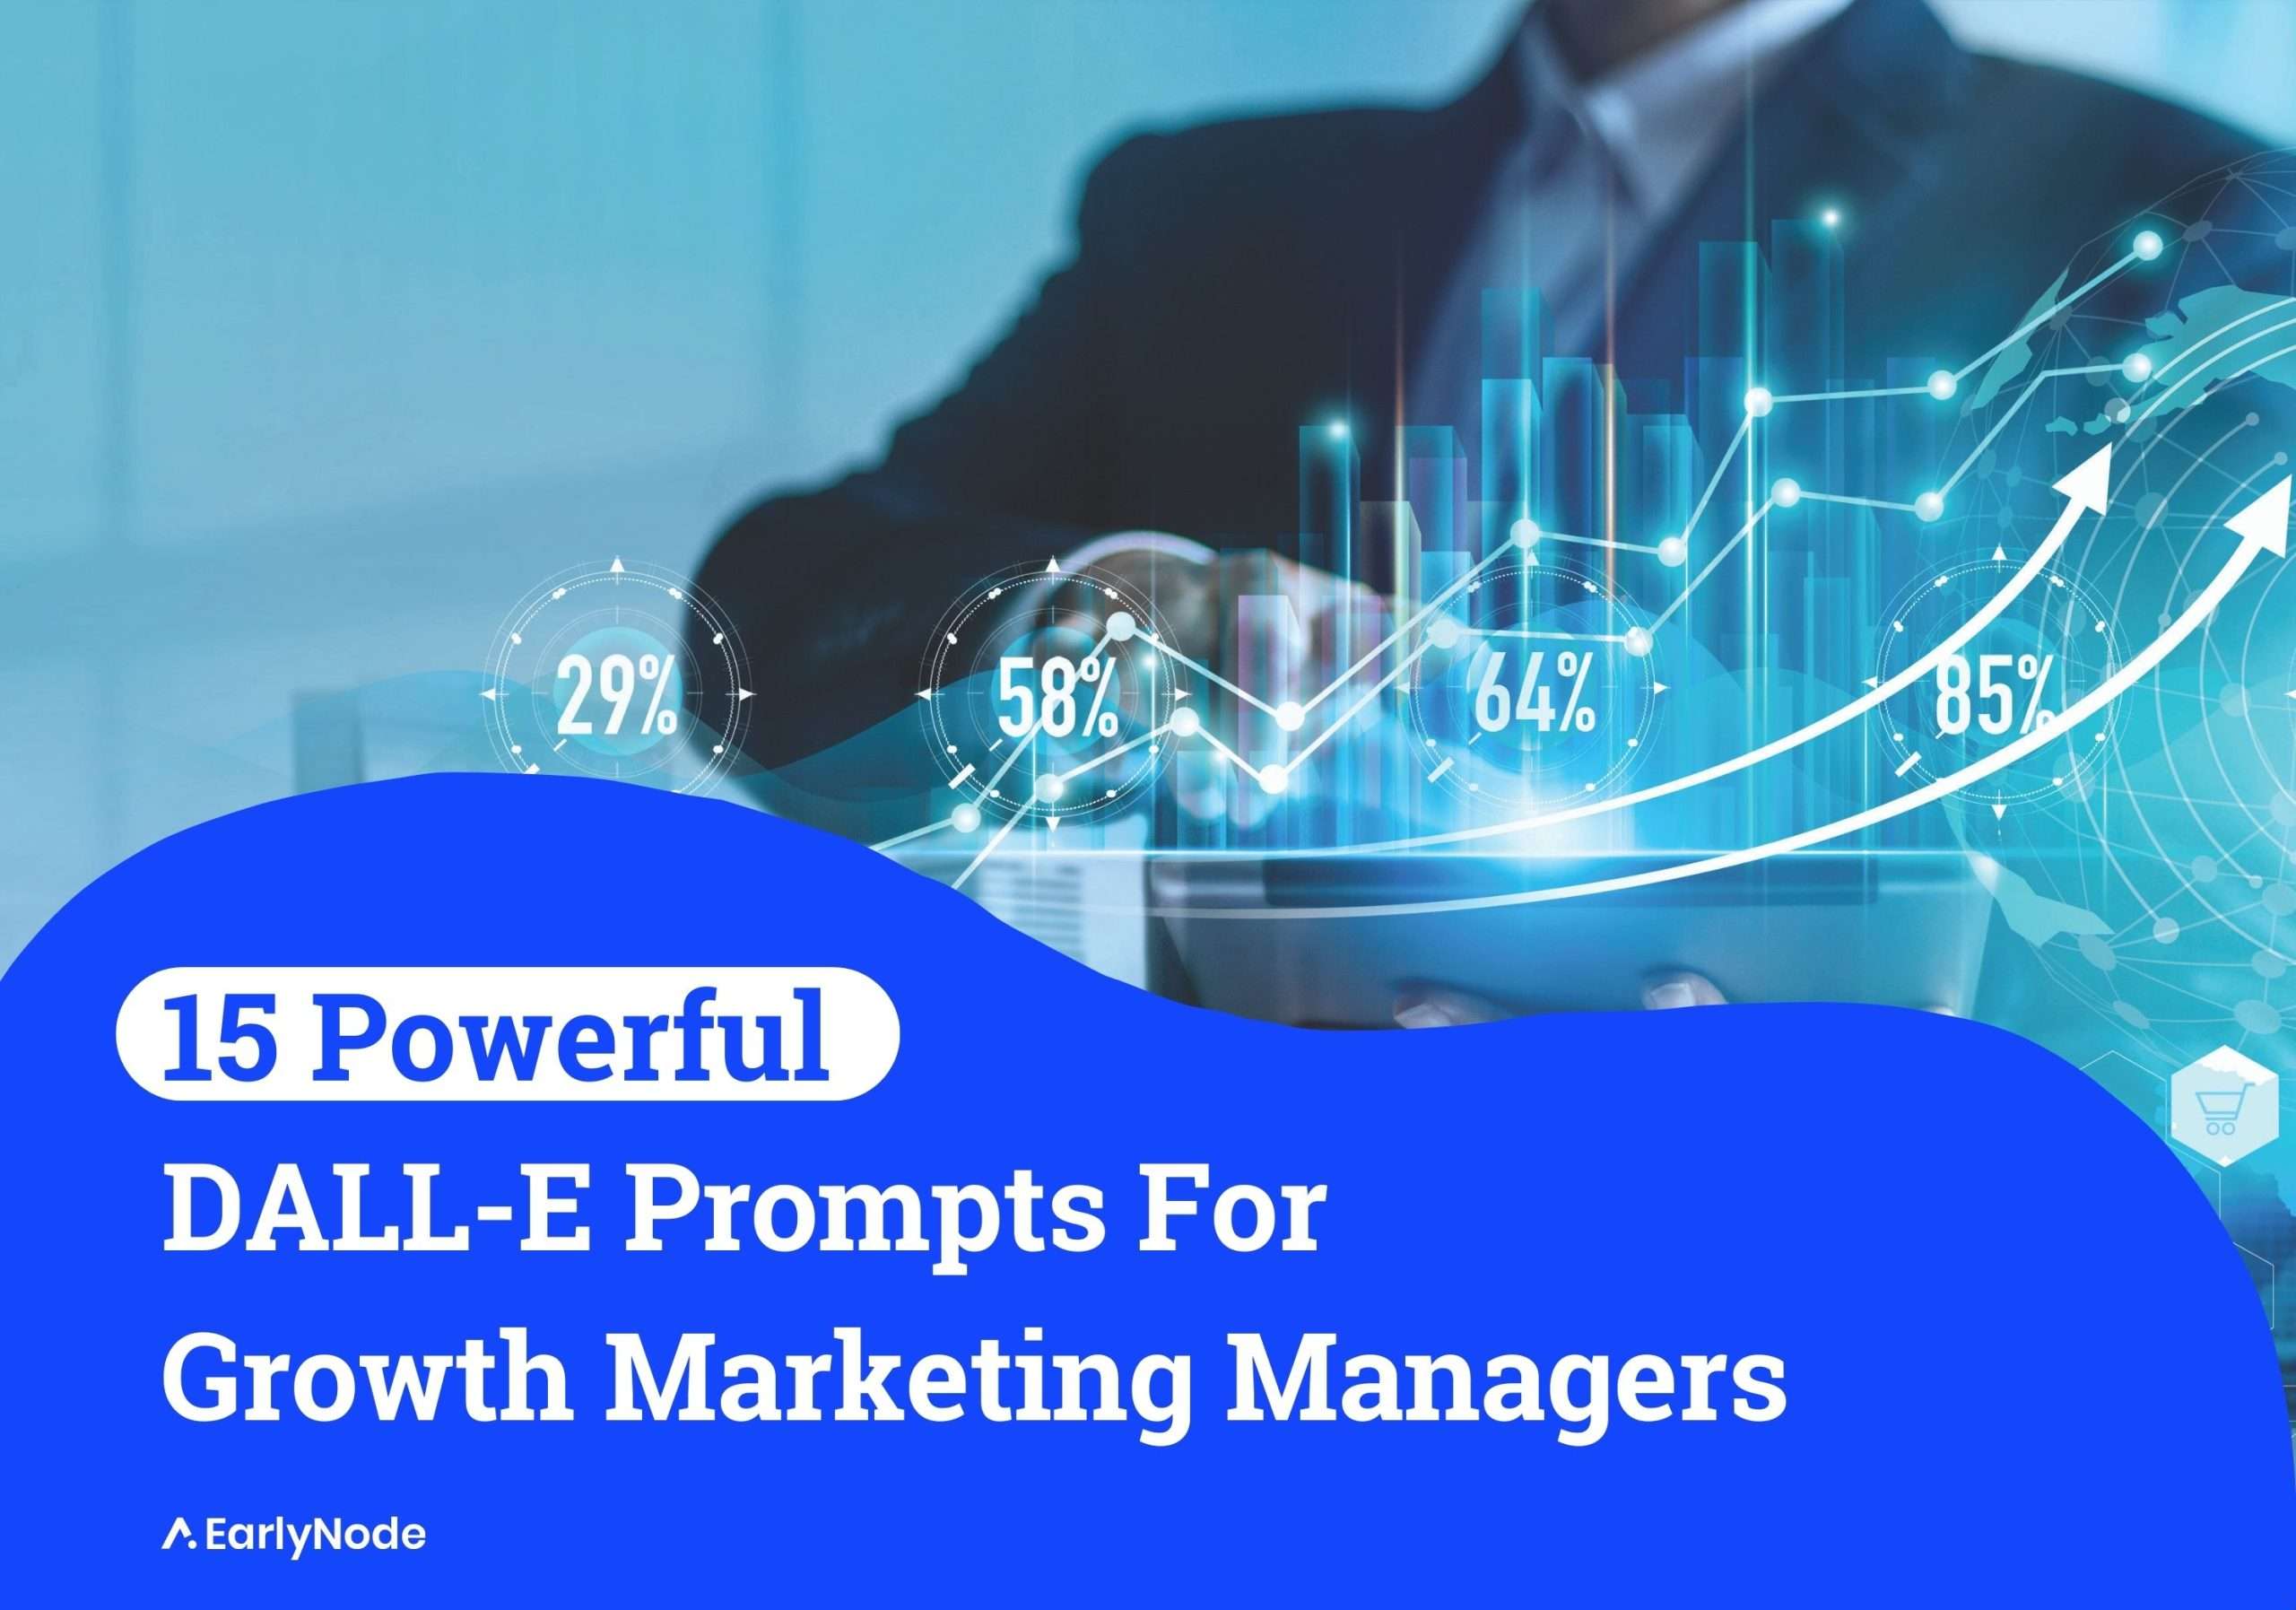 15+ Powerful DALL-E Prompts for Growth Marketing Managers